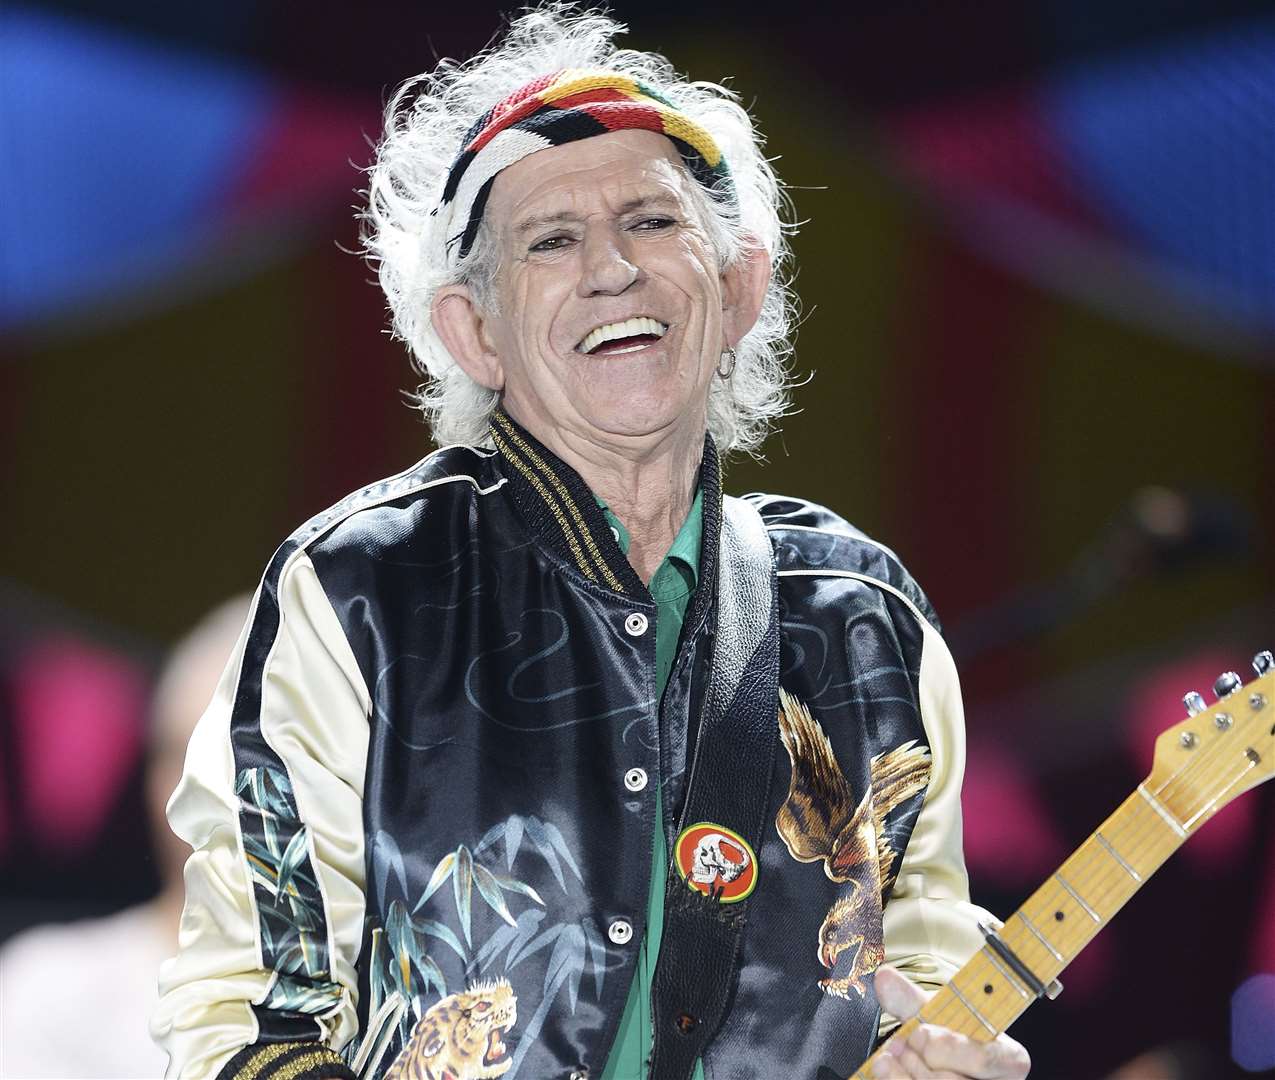 Keith Richards was less understanding of why the song had been pulled saying the controversy was misunderstood given the song comments on the 'horrors of slavery'. Picture: Dave J Hogan